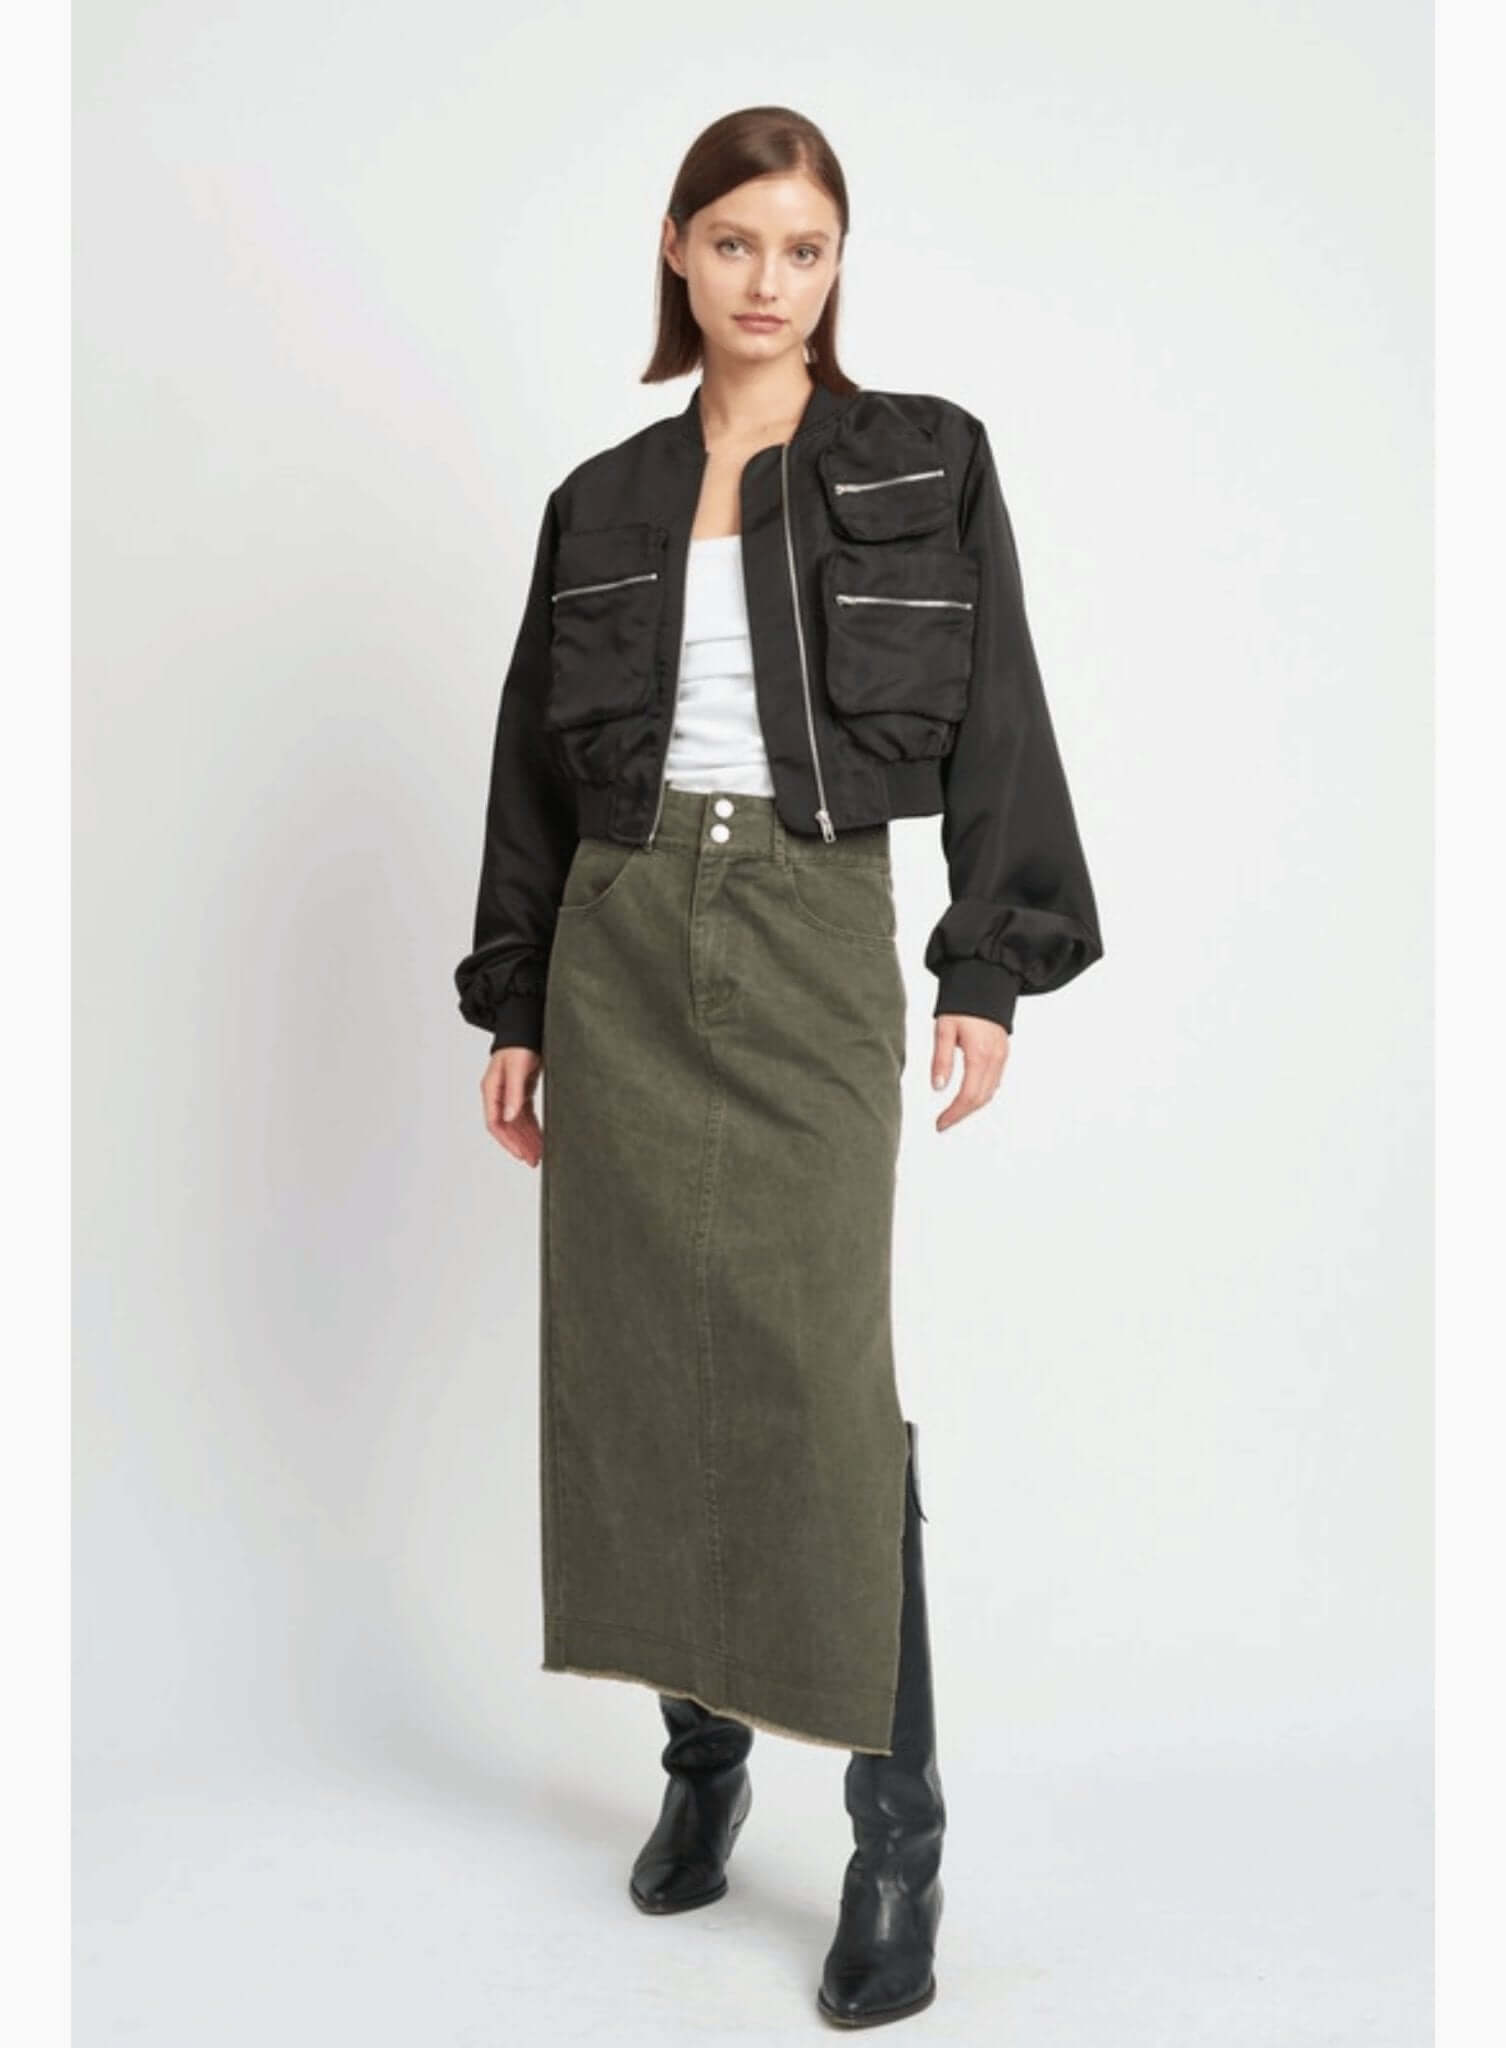 Cropped Bomber Jacket - Rocca & Co